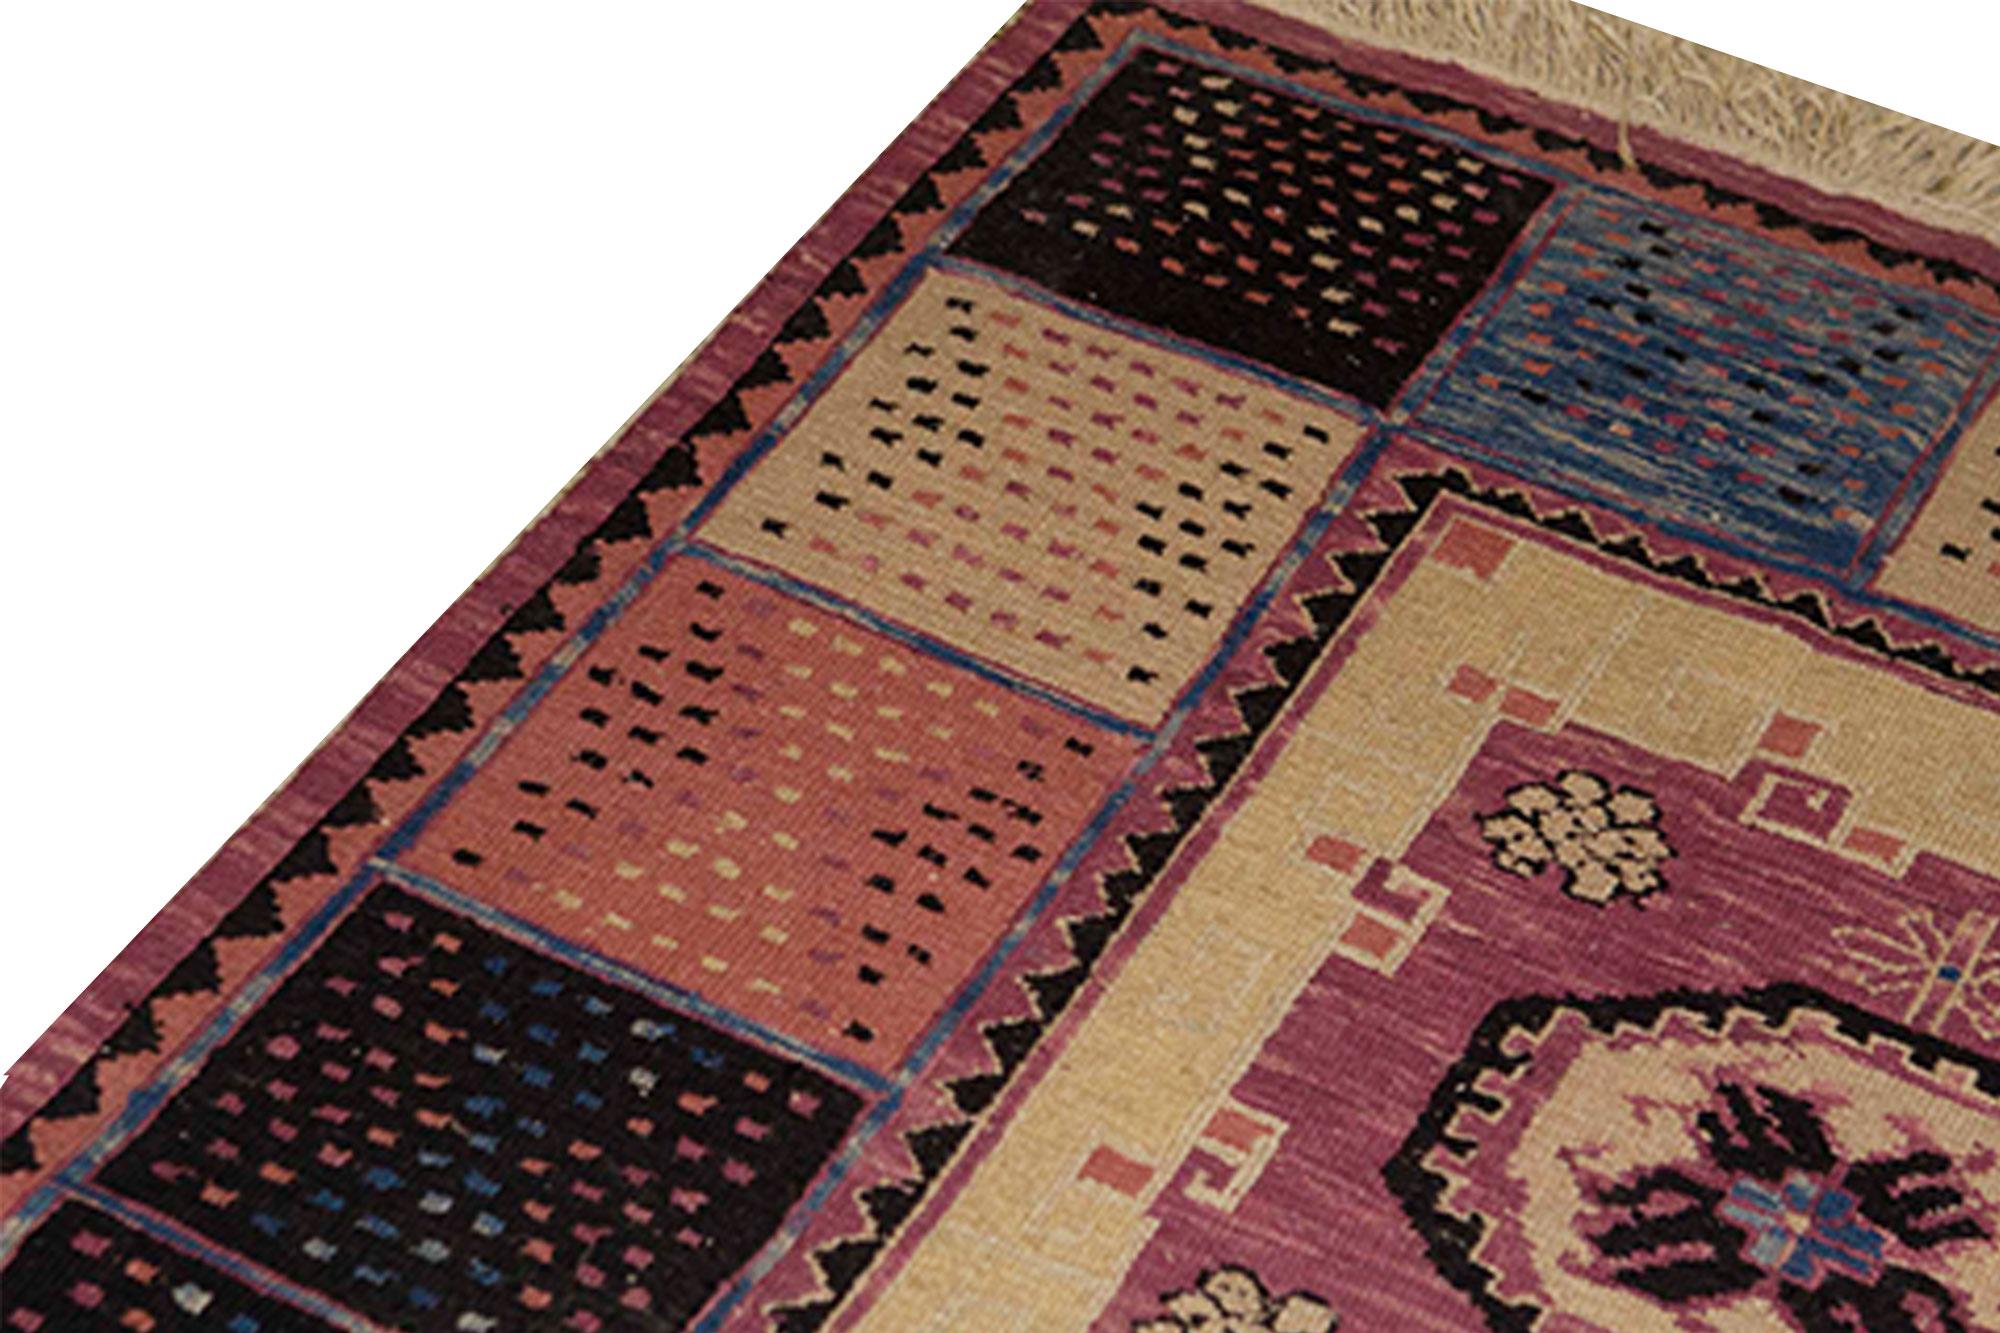 Based on authentic Oriental designs and using only the finest of wool's, these hand woven sumack rugs are truly timeless classics. These traditional styles reflect the classic patterns that have created the most beautiful of decors over the